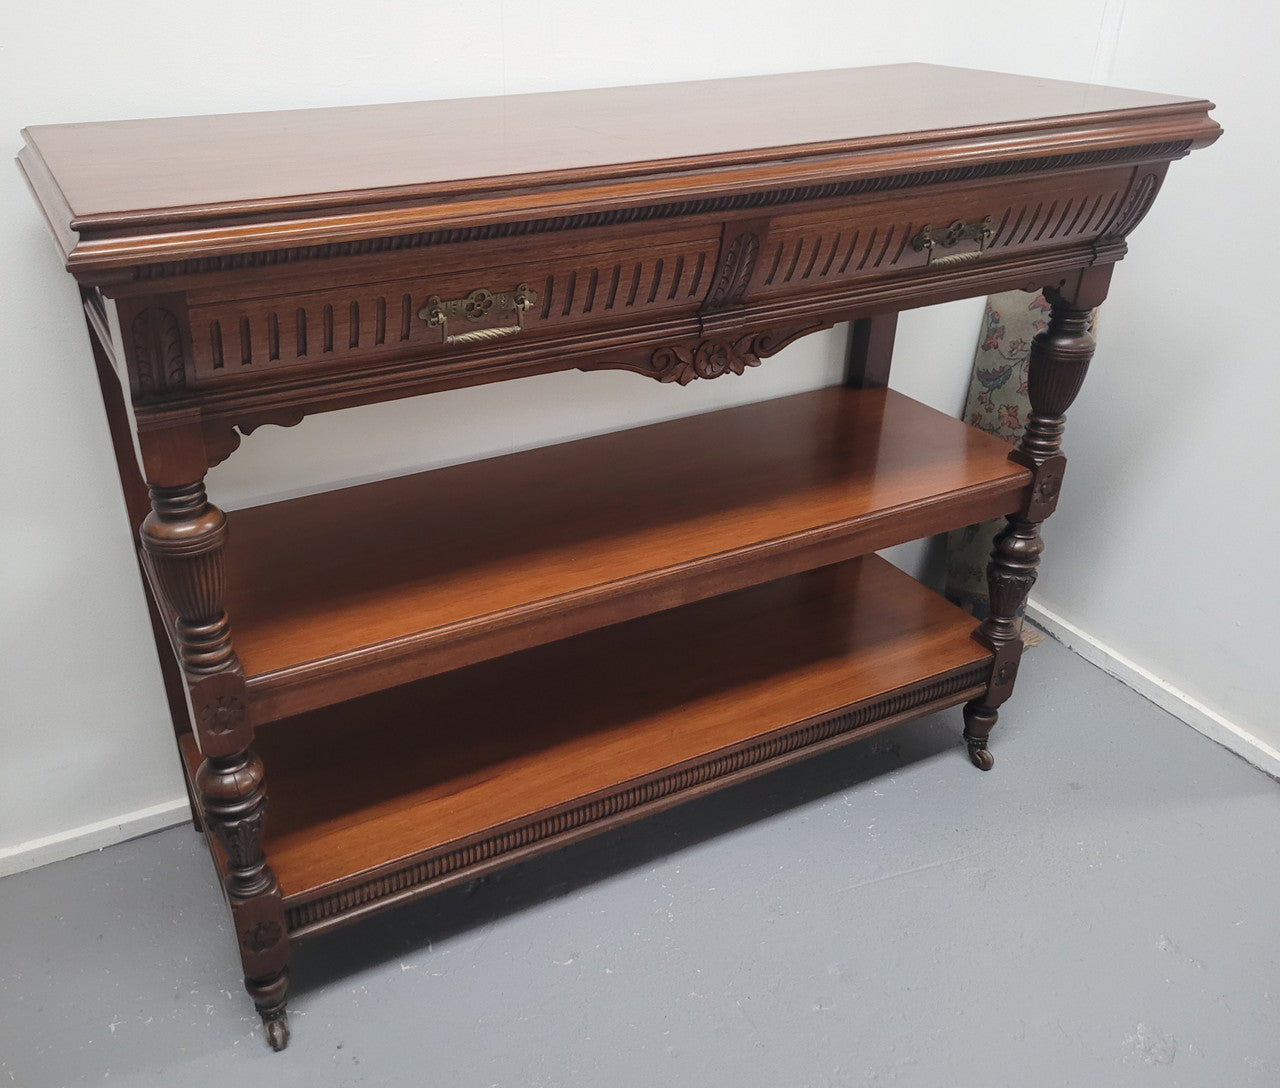 Fabulous quality Edwardian Walnut dumb waiter. It has two drawers and two shelves and is on casters. In good original detailed condition.